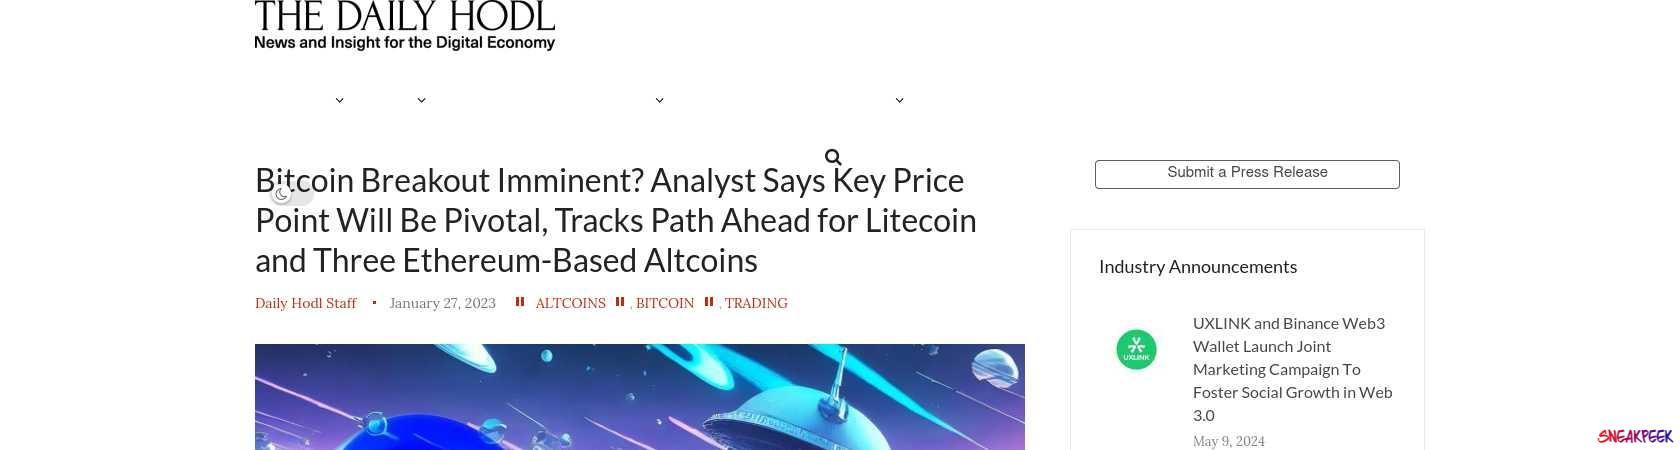 Read the full Article:  ⭲ Bitcoin Breakout Imminent? Analyst Says Key Price Point Will Be Pivotal, Tracks Path Ahead for Litecoin and Three Ethereum-Based Altcoins